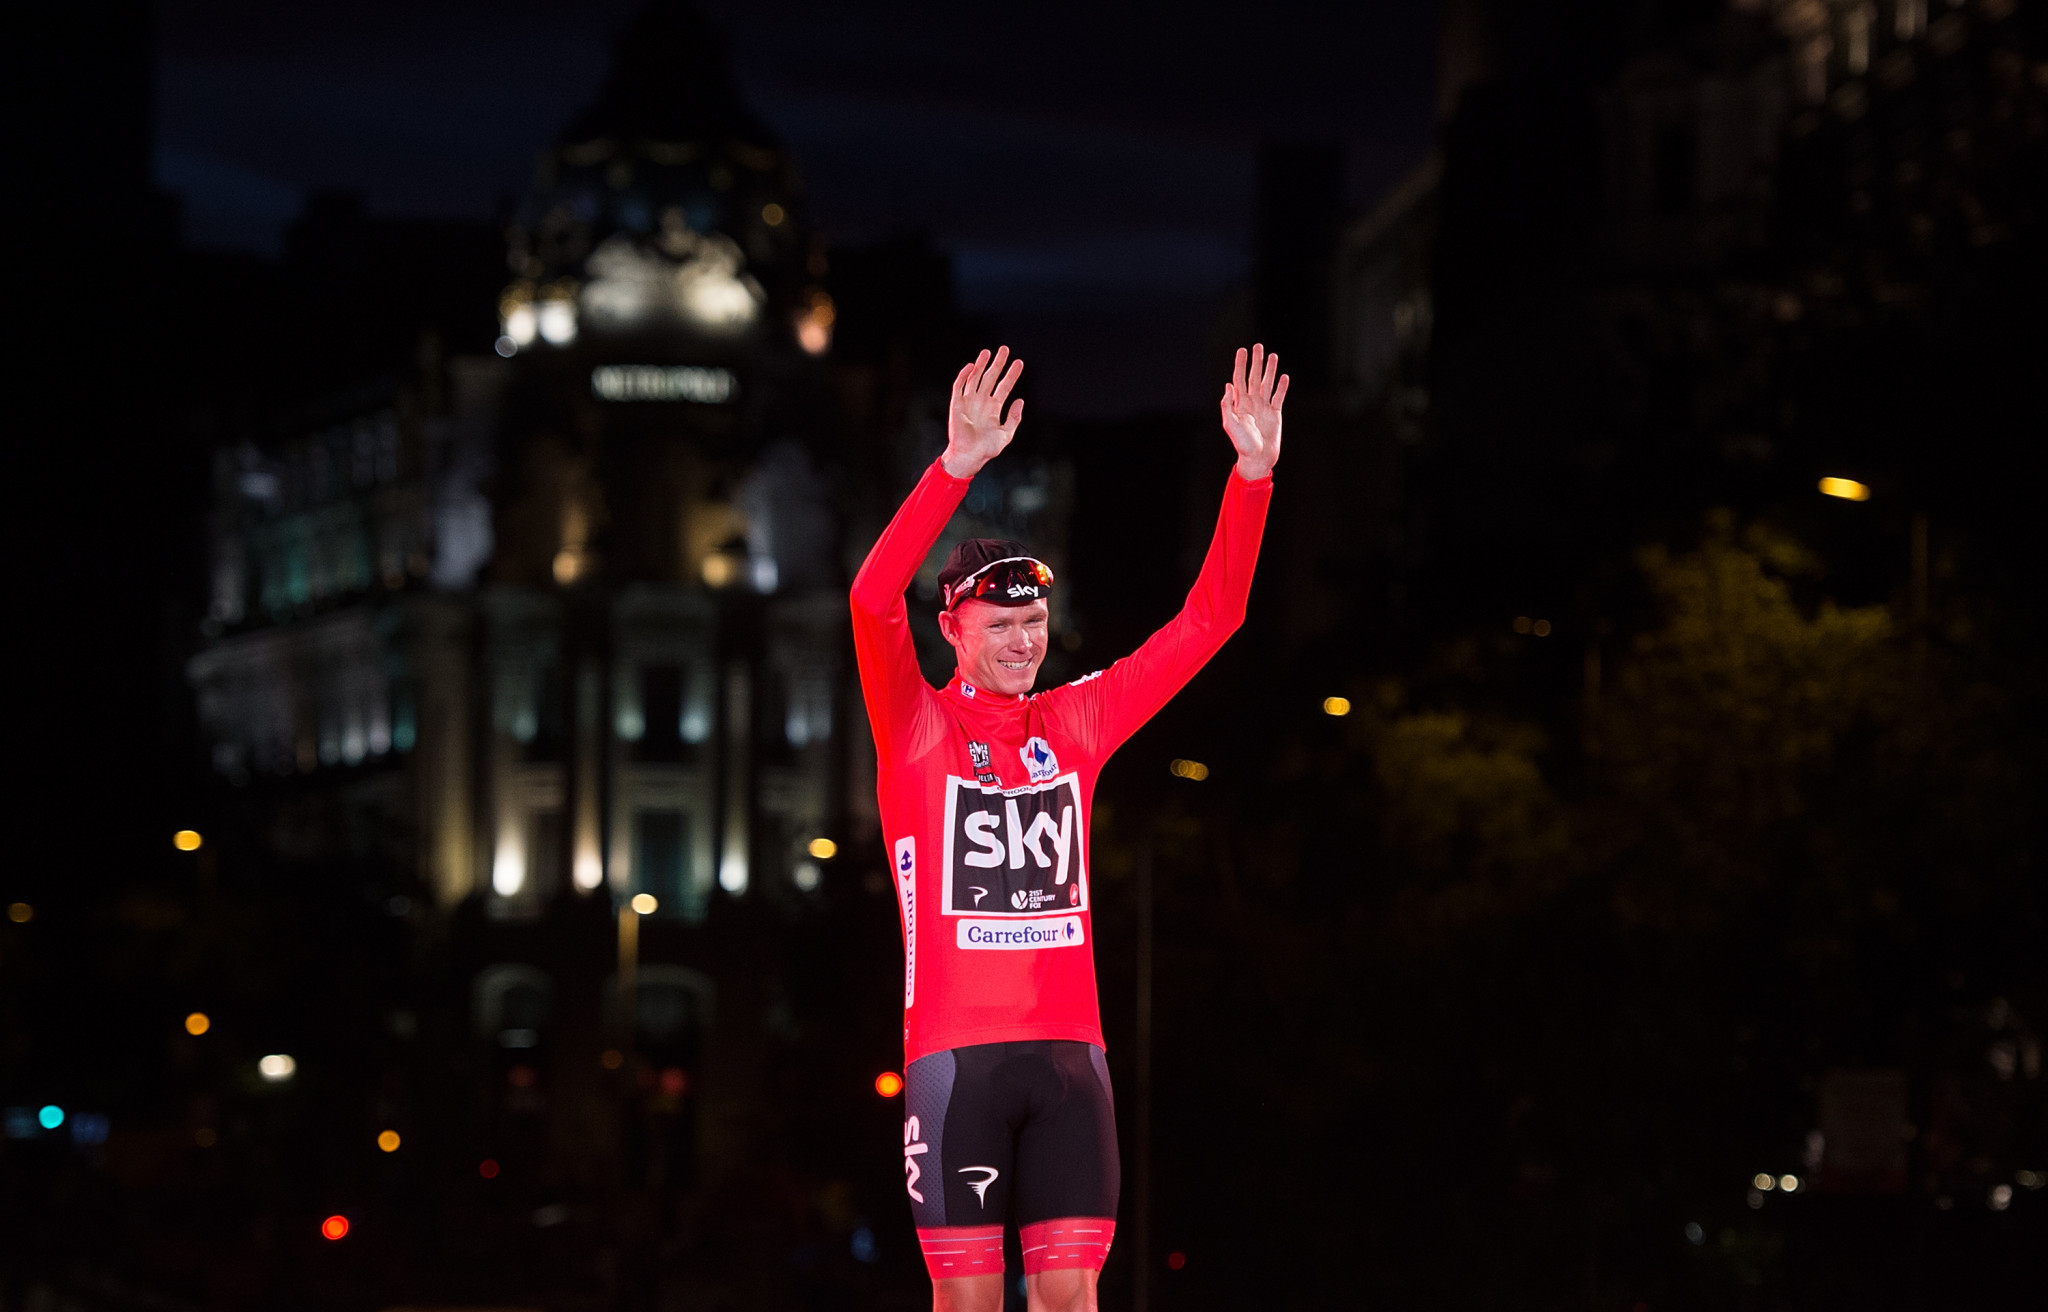 Chris Froome has been asked to provide information following an abnormal drug test at the Vuelta a Espana ©Getty Images